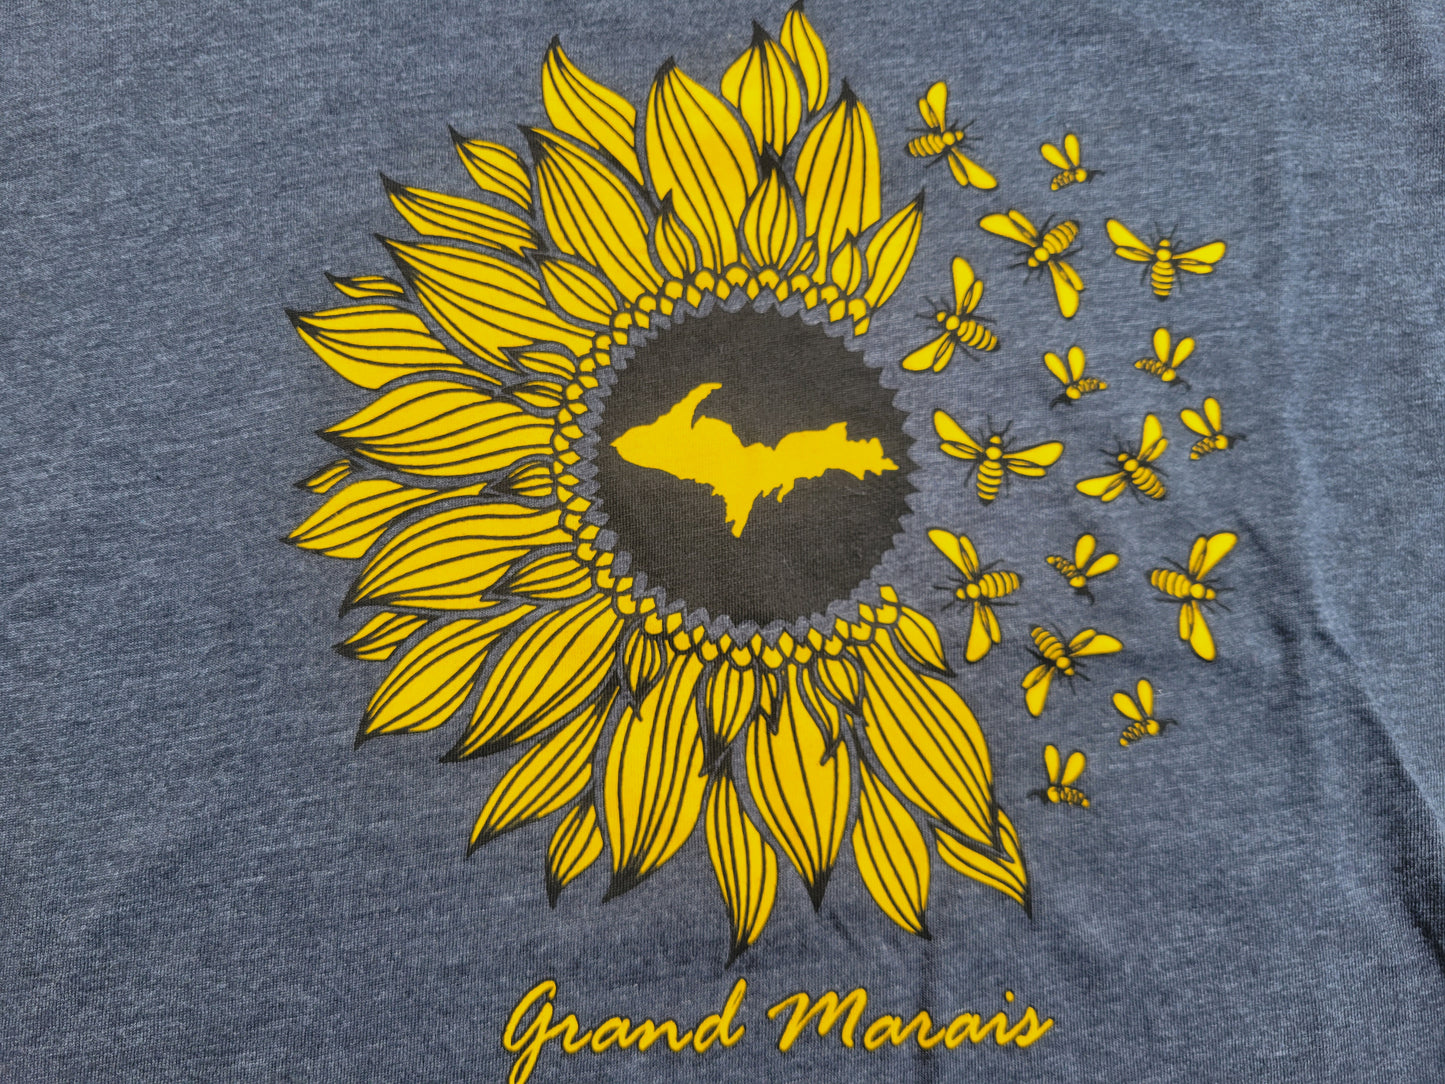 Sunflower with Bees short sleeve